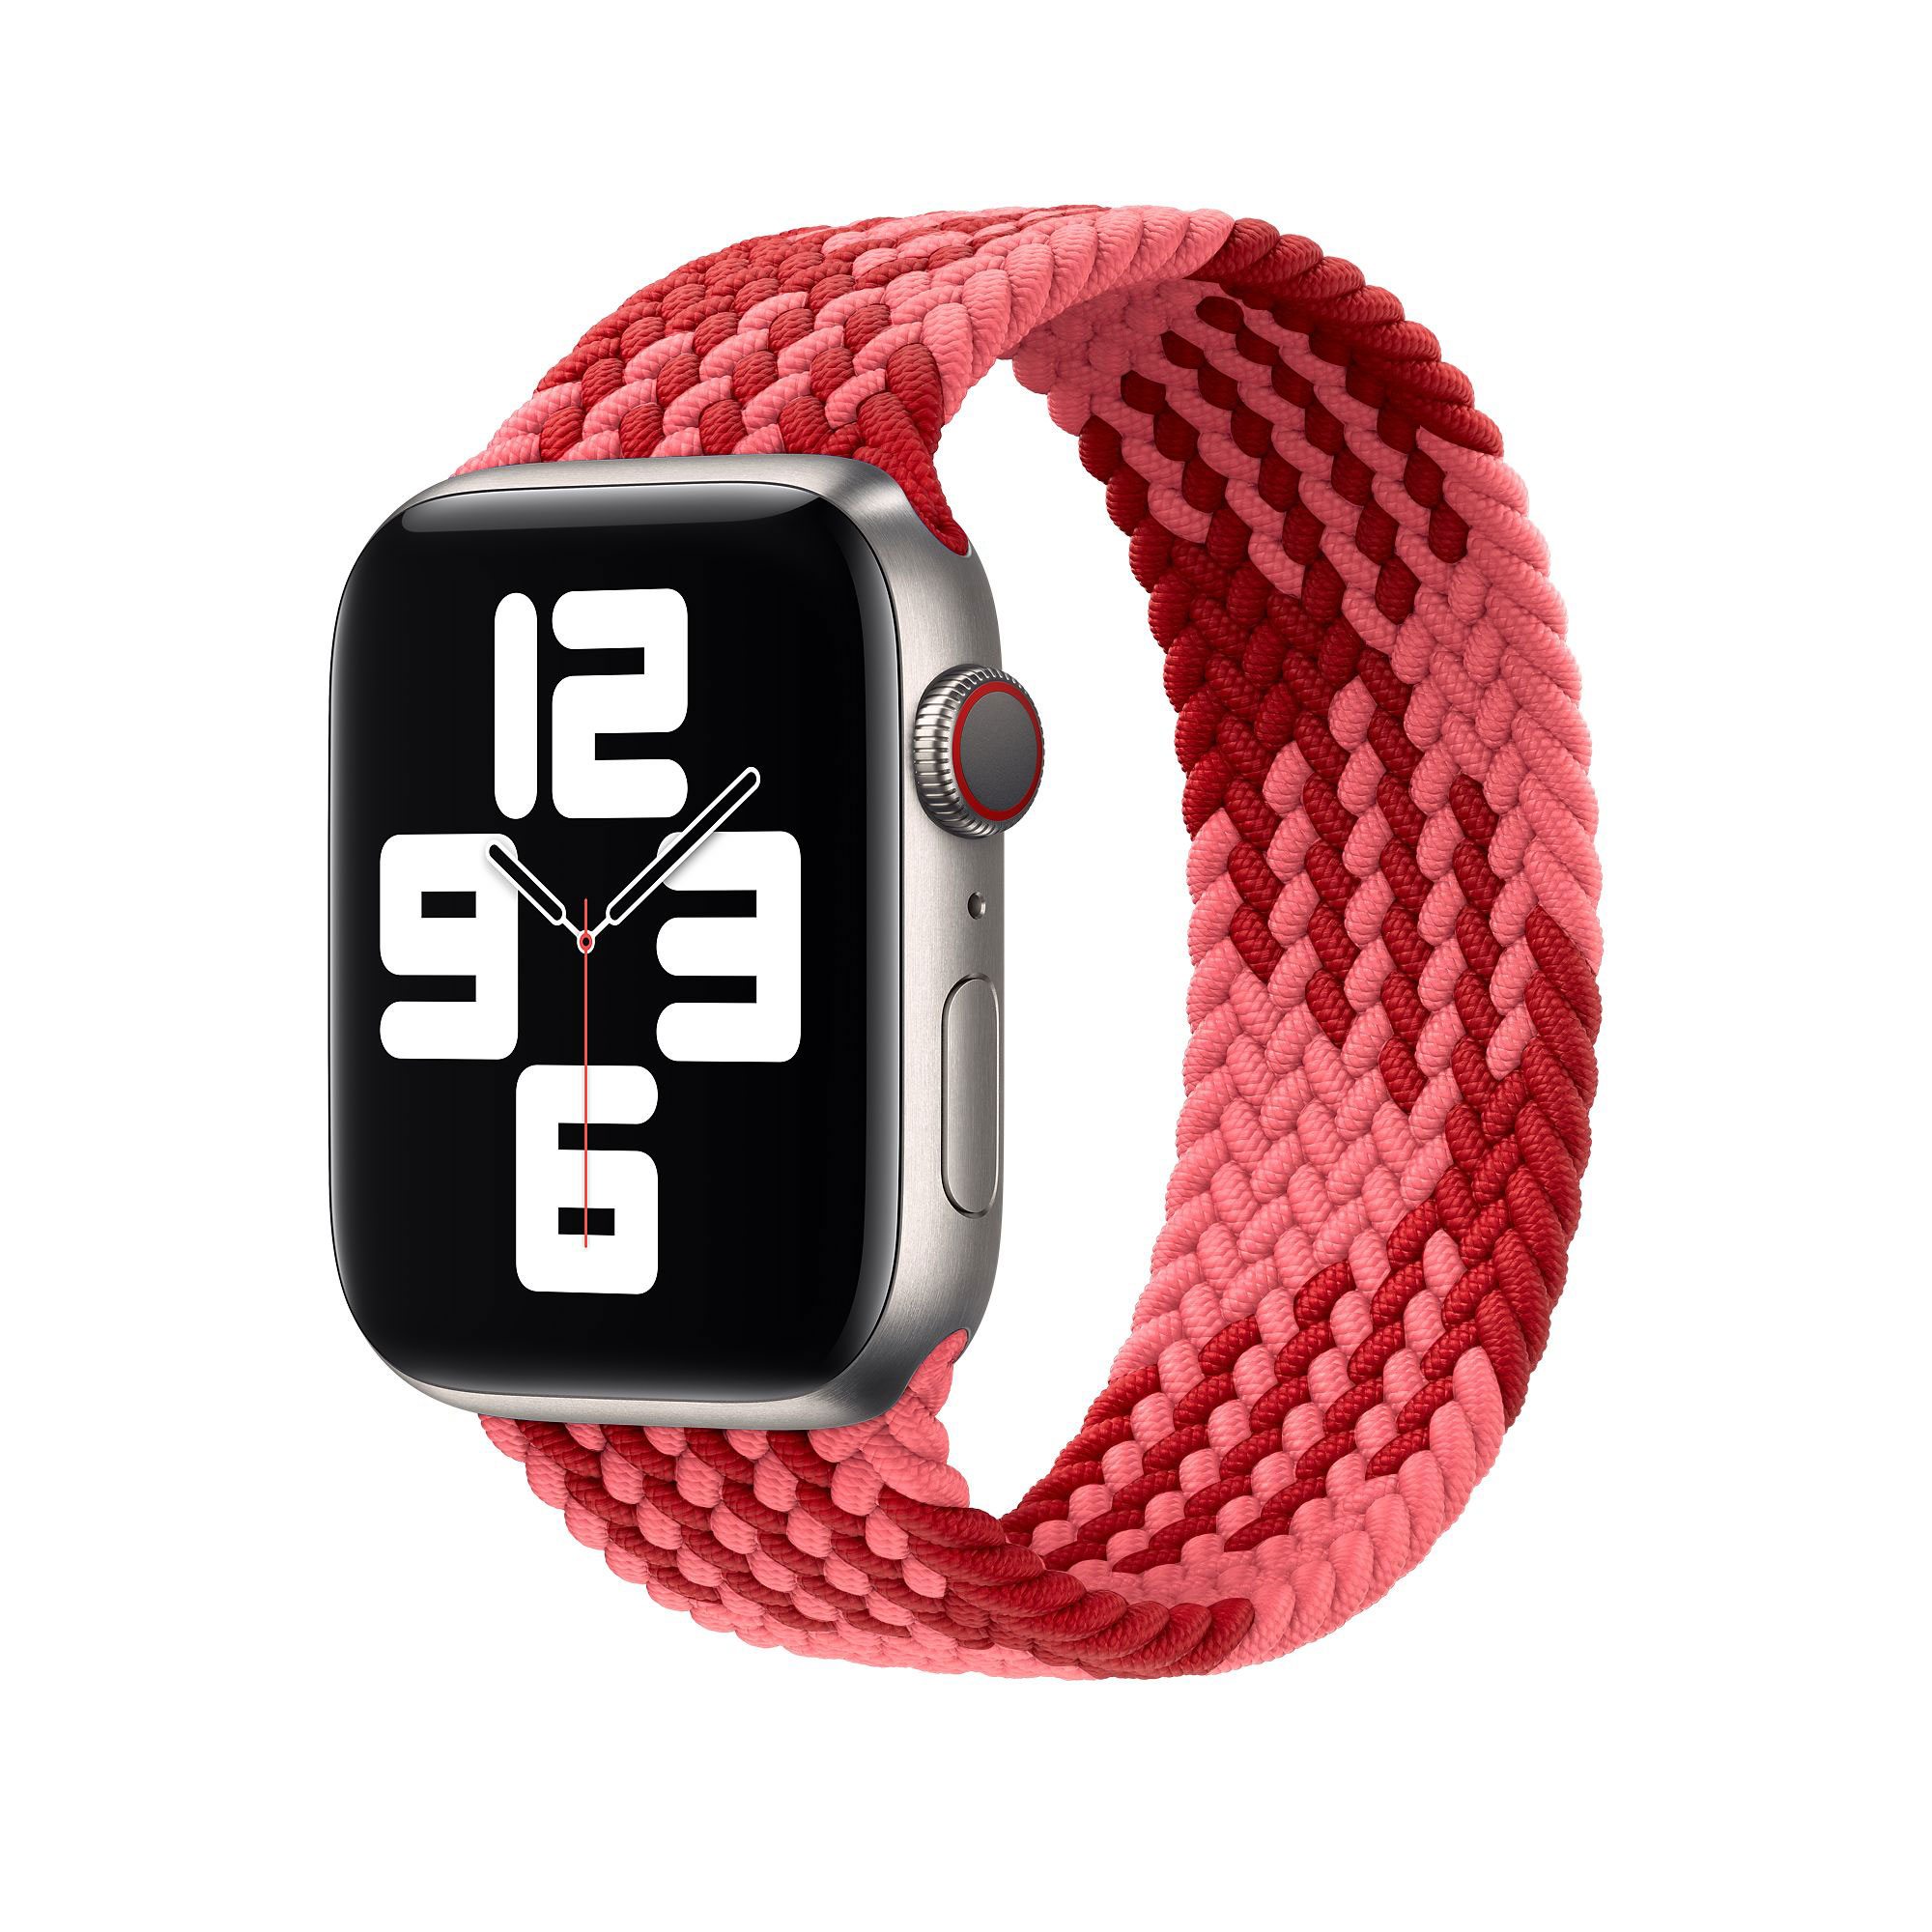 WiWU Braided Stretchy Solo Loop Band Compatible with Apple Watch Sport Straps Nylon Woven Elastic Watch Bands